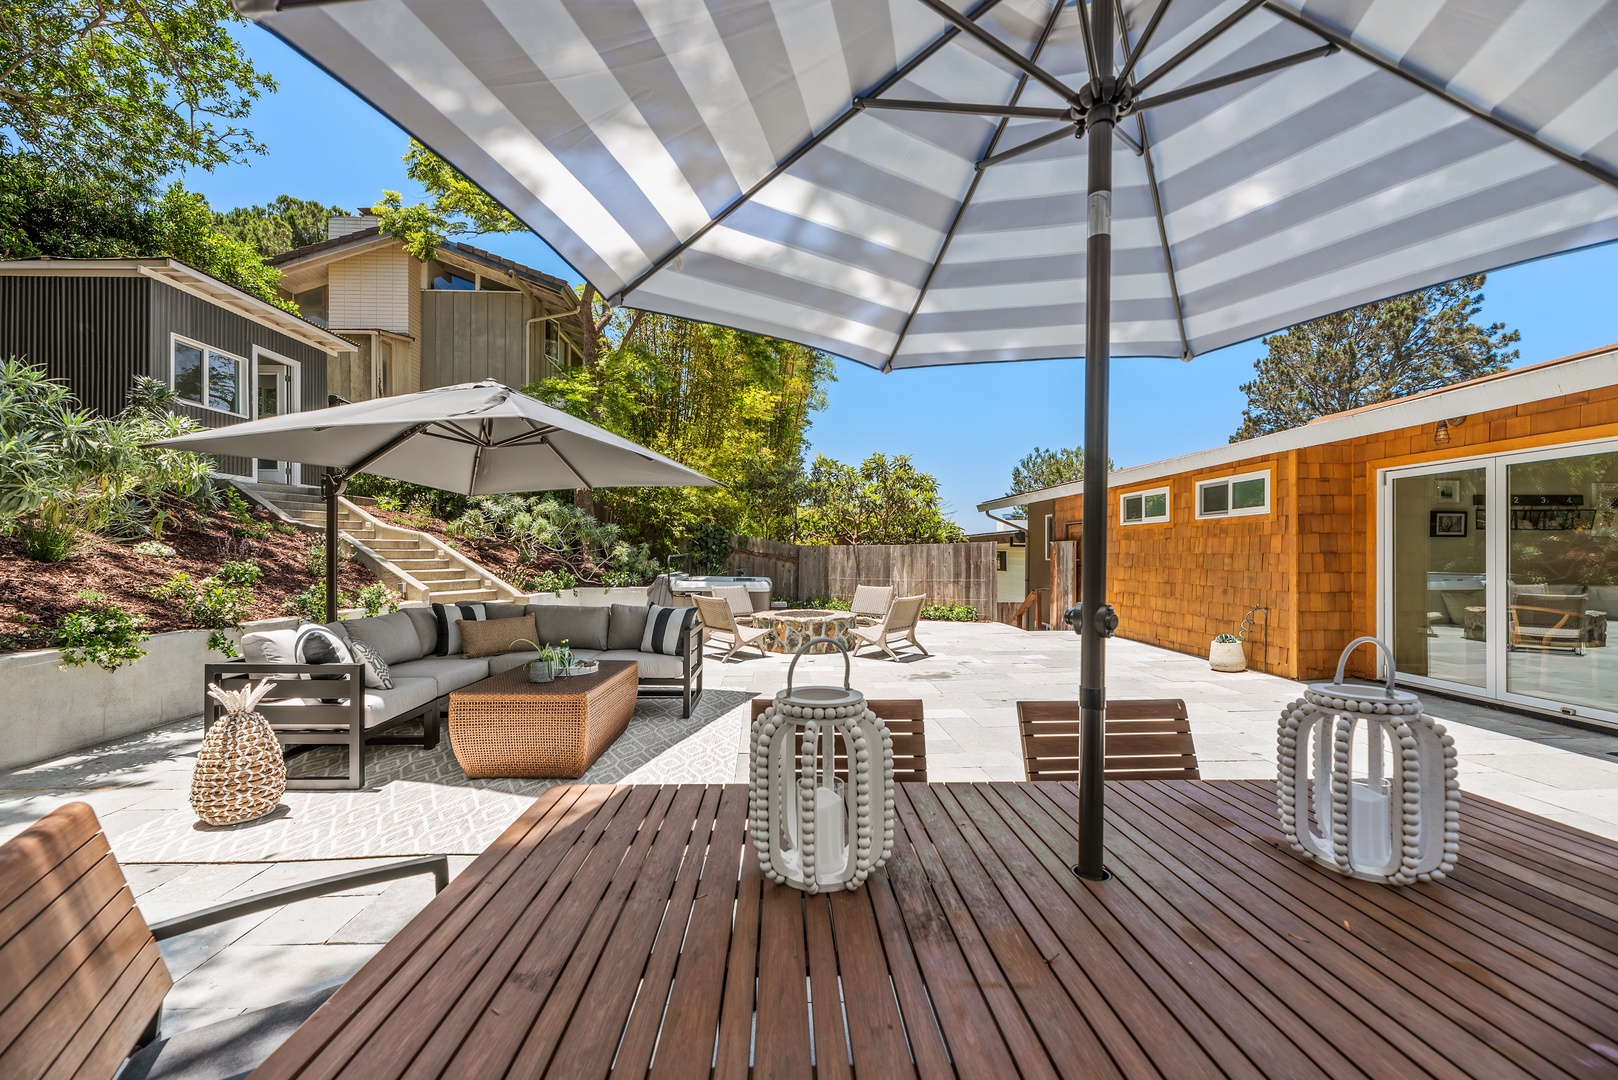 Del Mar Vacation Rentals, Del Mar Zuni Delight - You'll love spending your evenings outside on the deck or around the fire pit, taking in the stunning ocean views.